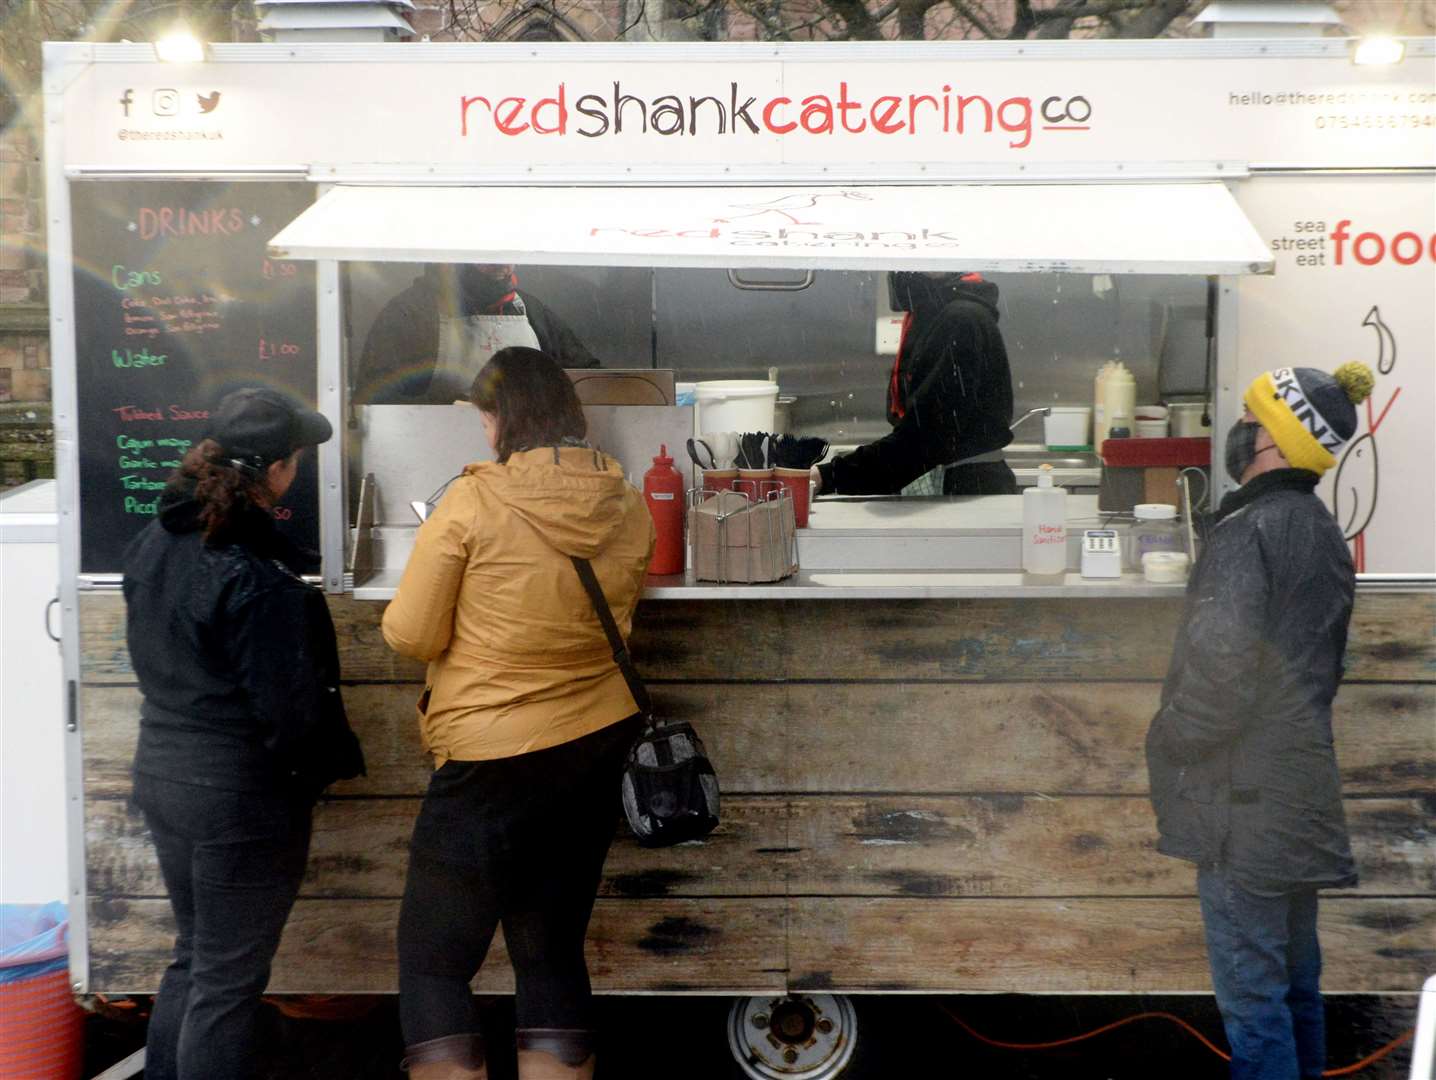 Food & Drink Trail on Ness Walk: Redshank Catering Co. Picture: James Mackenzie